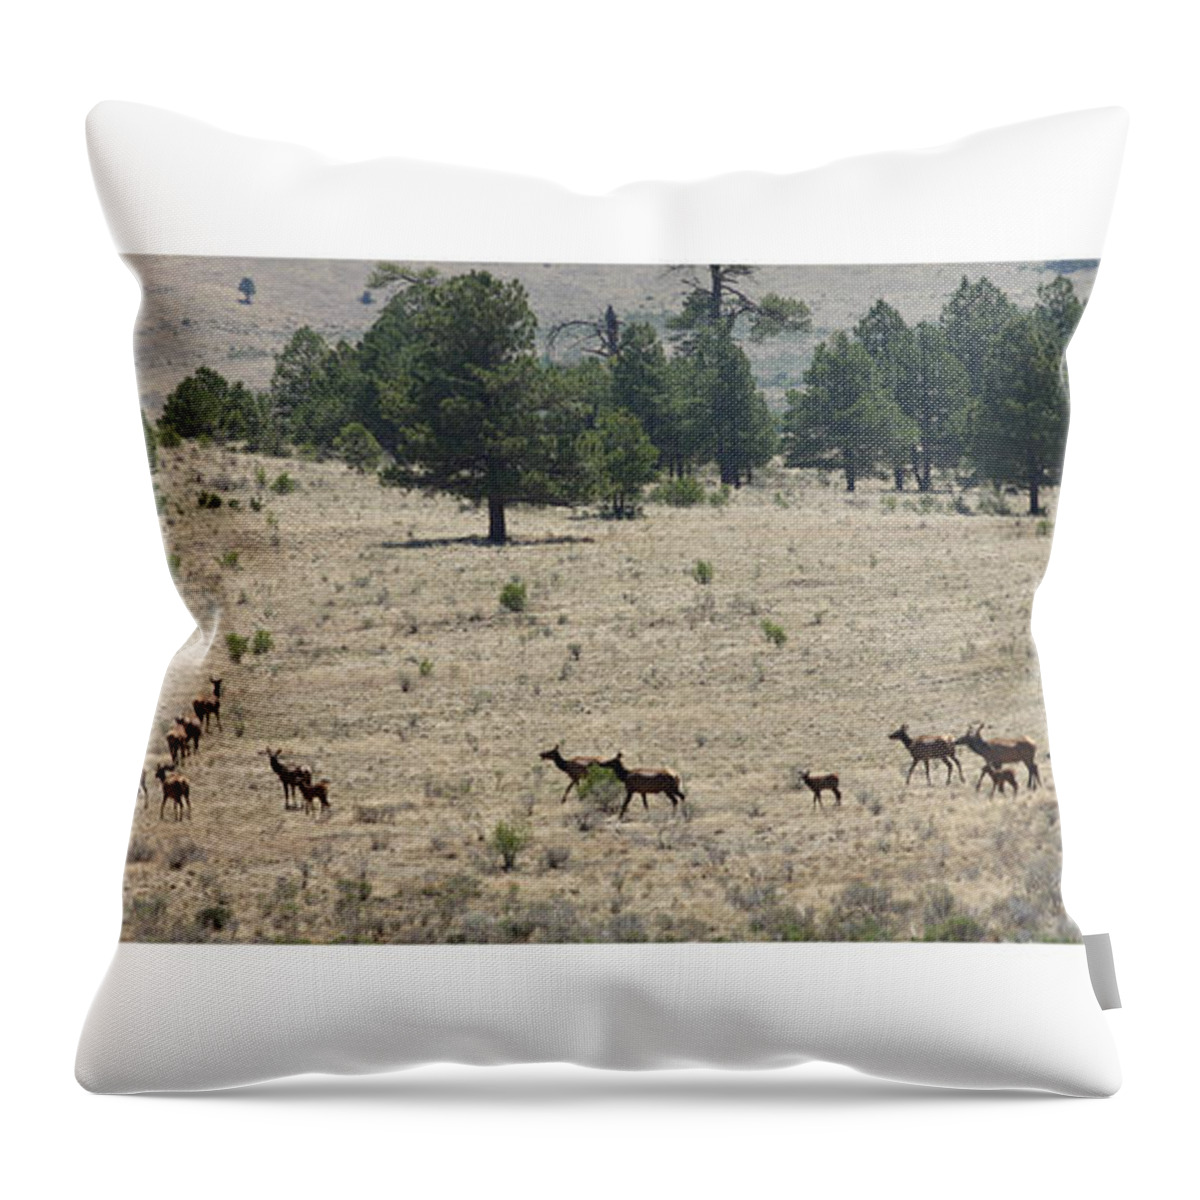 Wild Life Photography By Jack Pumphrey Throw Pillow featuring the photograph New Mexico Elk Herd by Jack Pumphrey